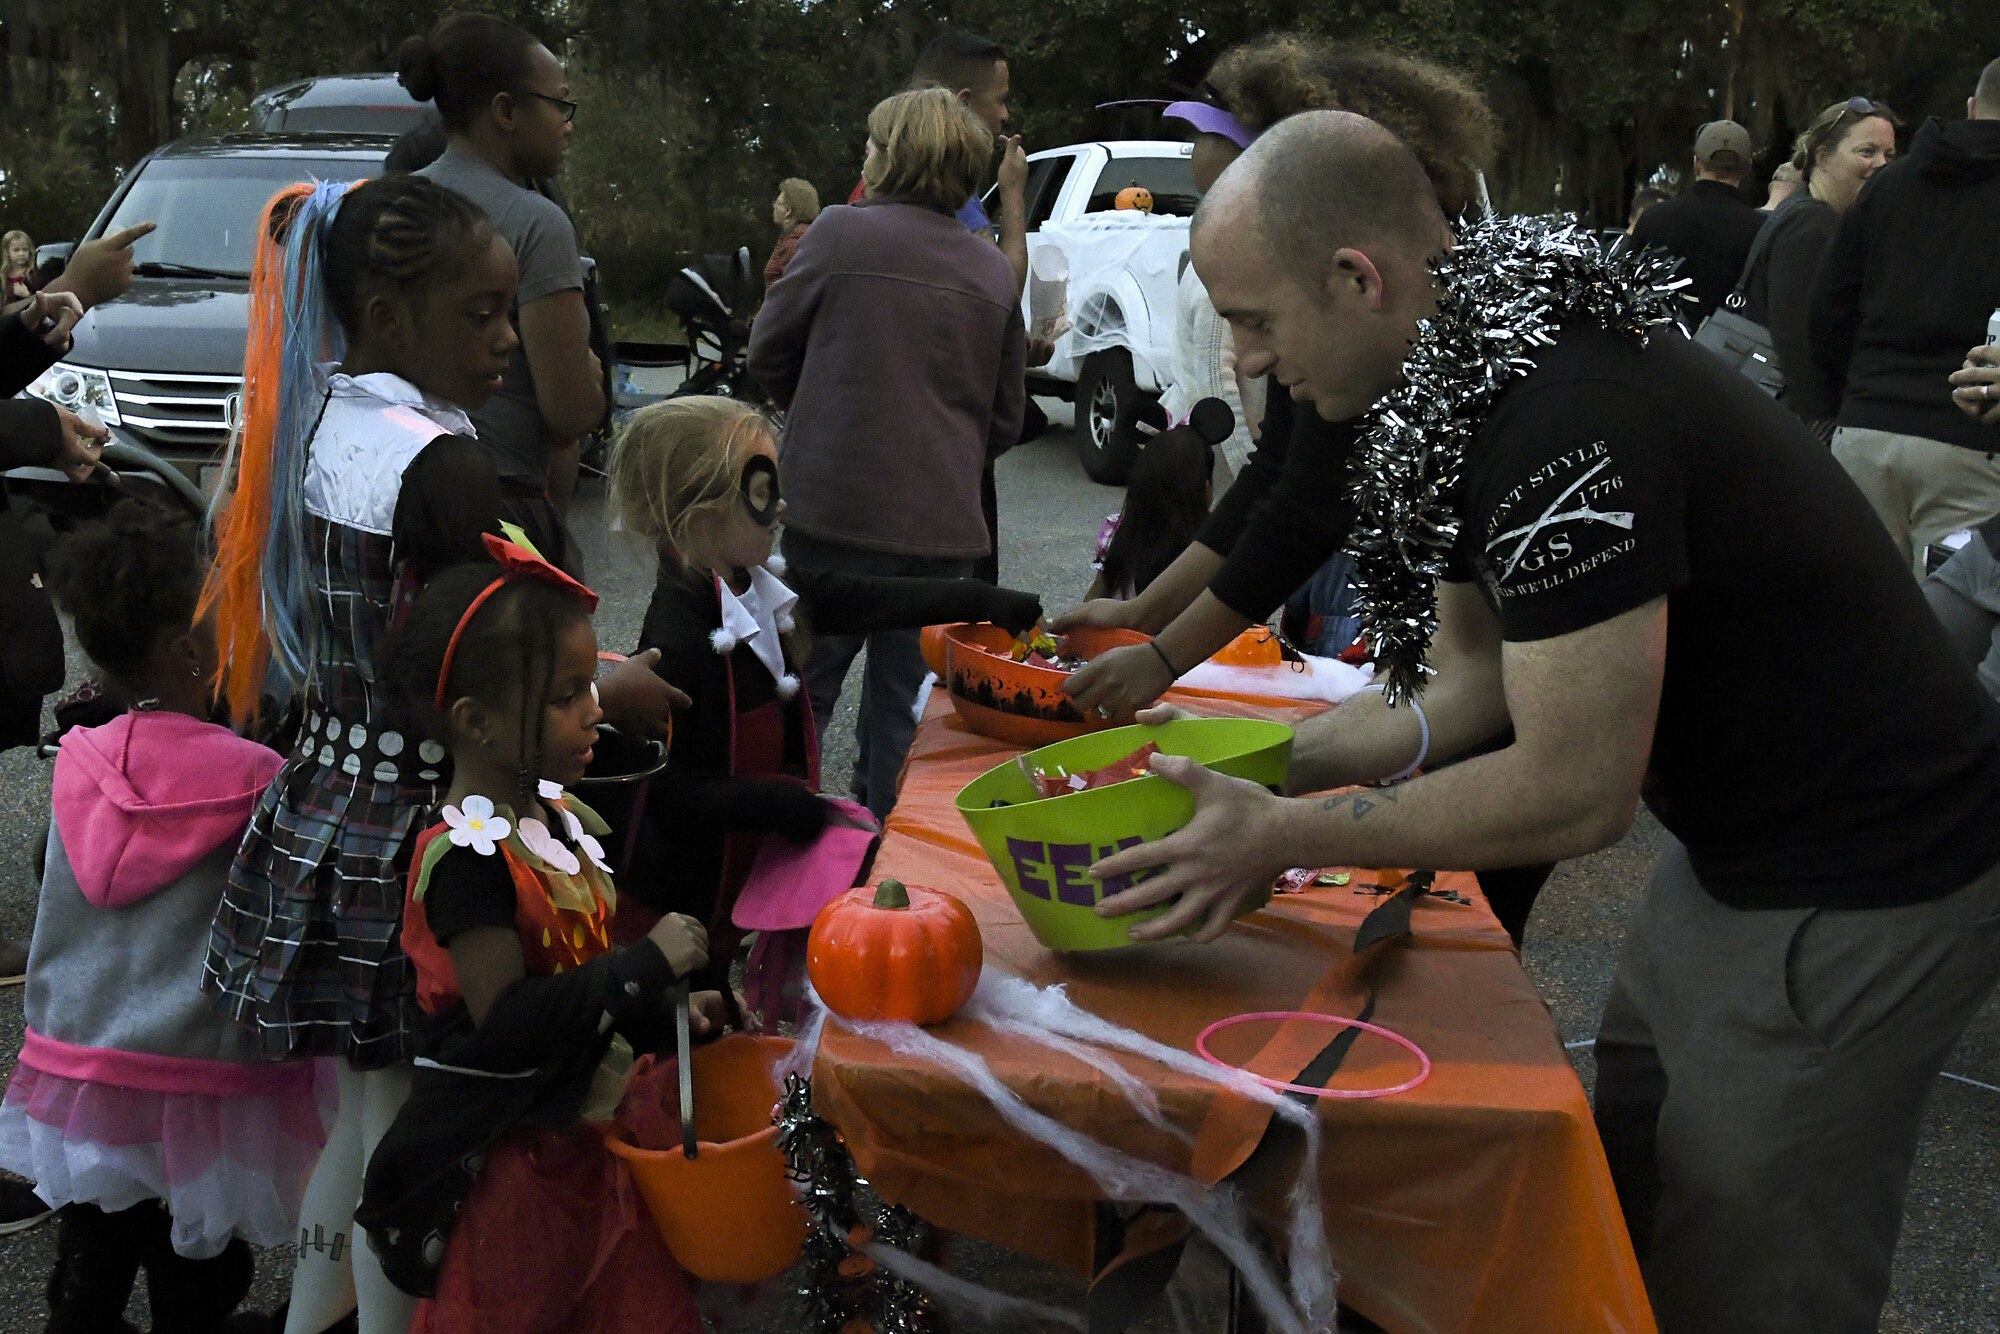 Keesler families collect candy during Ghouls in the Park at Marina Park at Keesler Air Force Base, Mississippi, Oct. 26, 2018. The Halloween event also featured the Boo Bus, a haunted house and various games for children of all ages. (U.S. Air Force photo by Airman 1st Class Suzie Plotnikov)